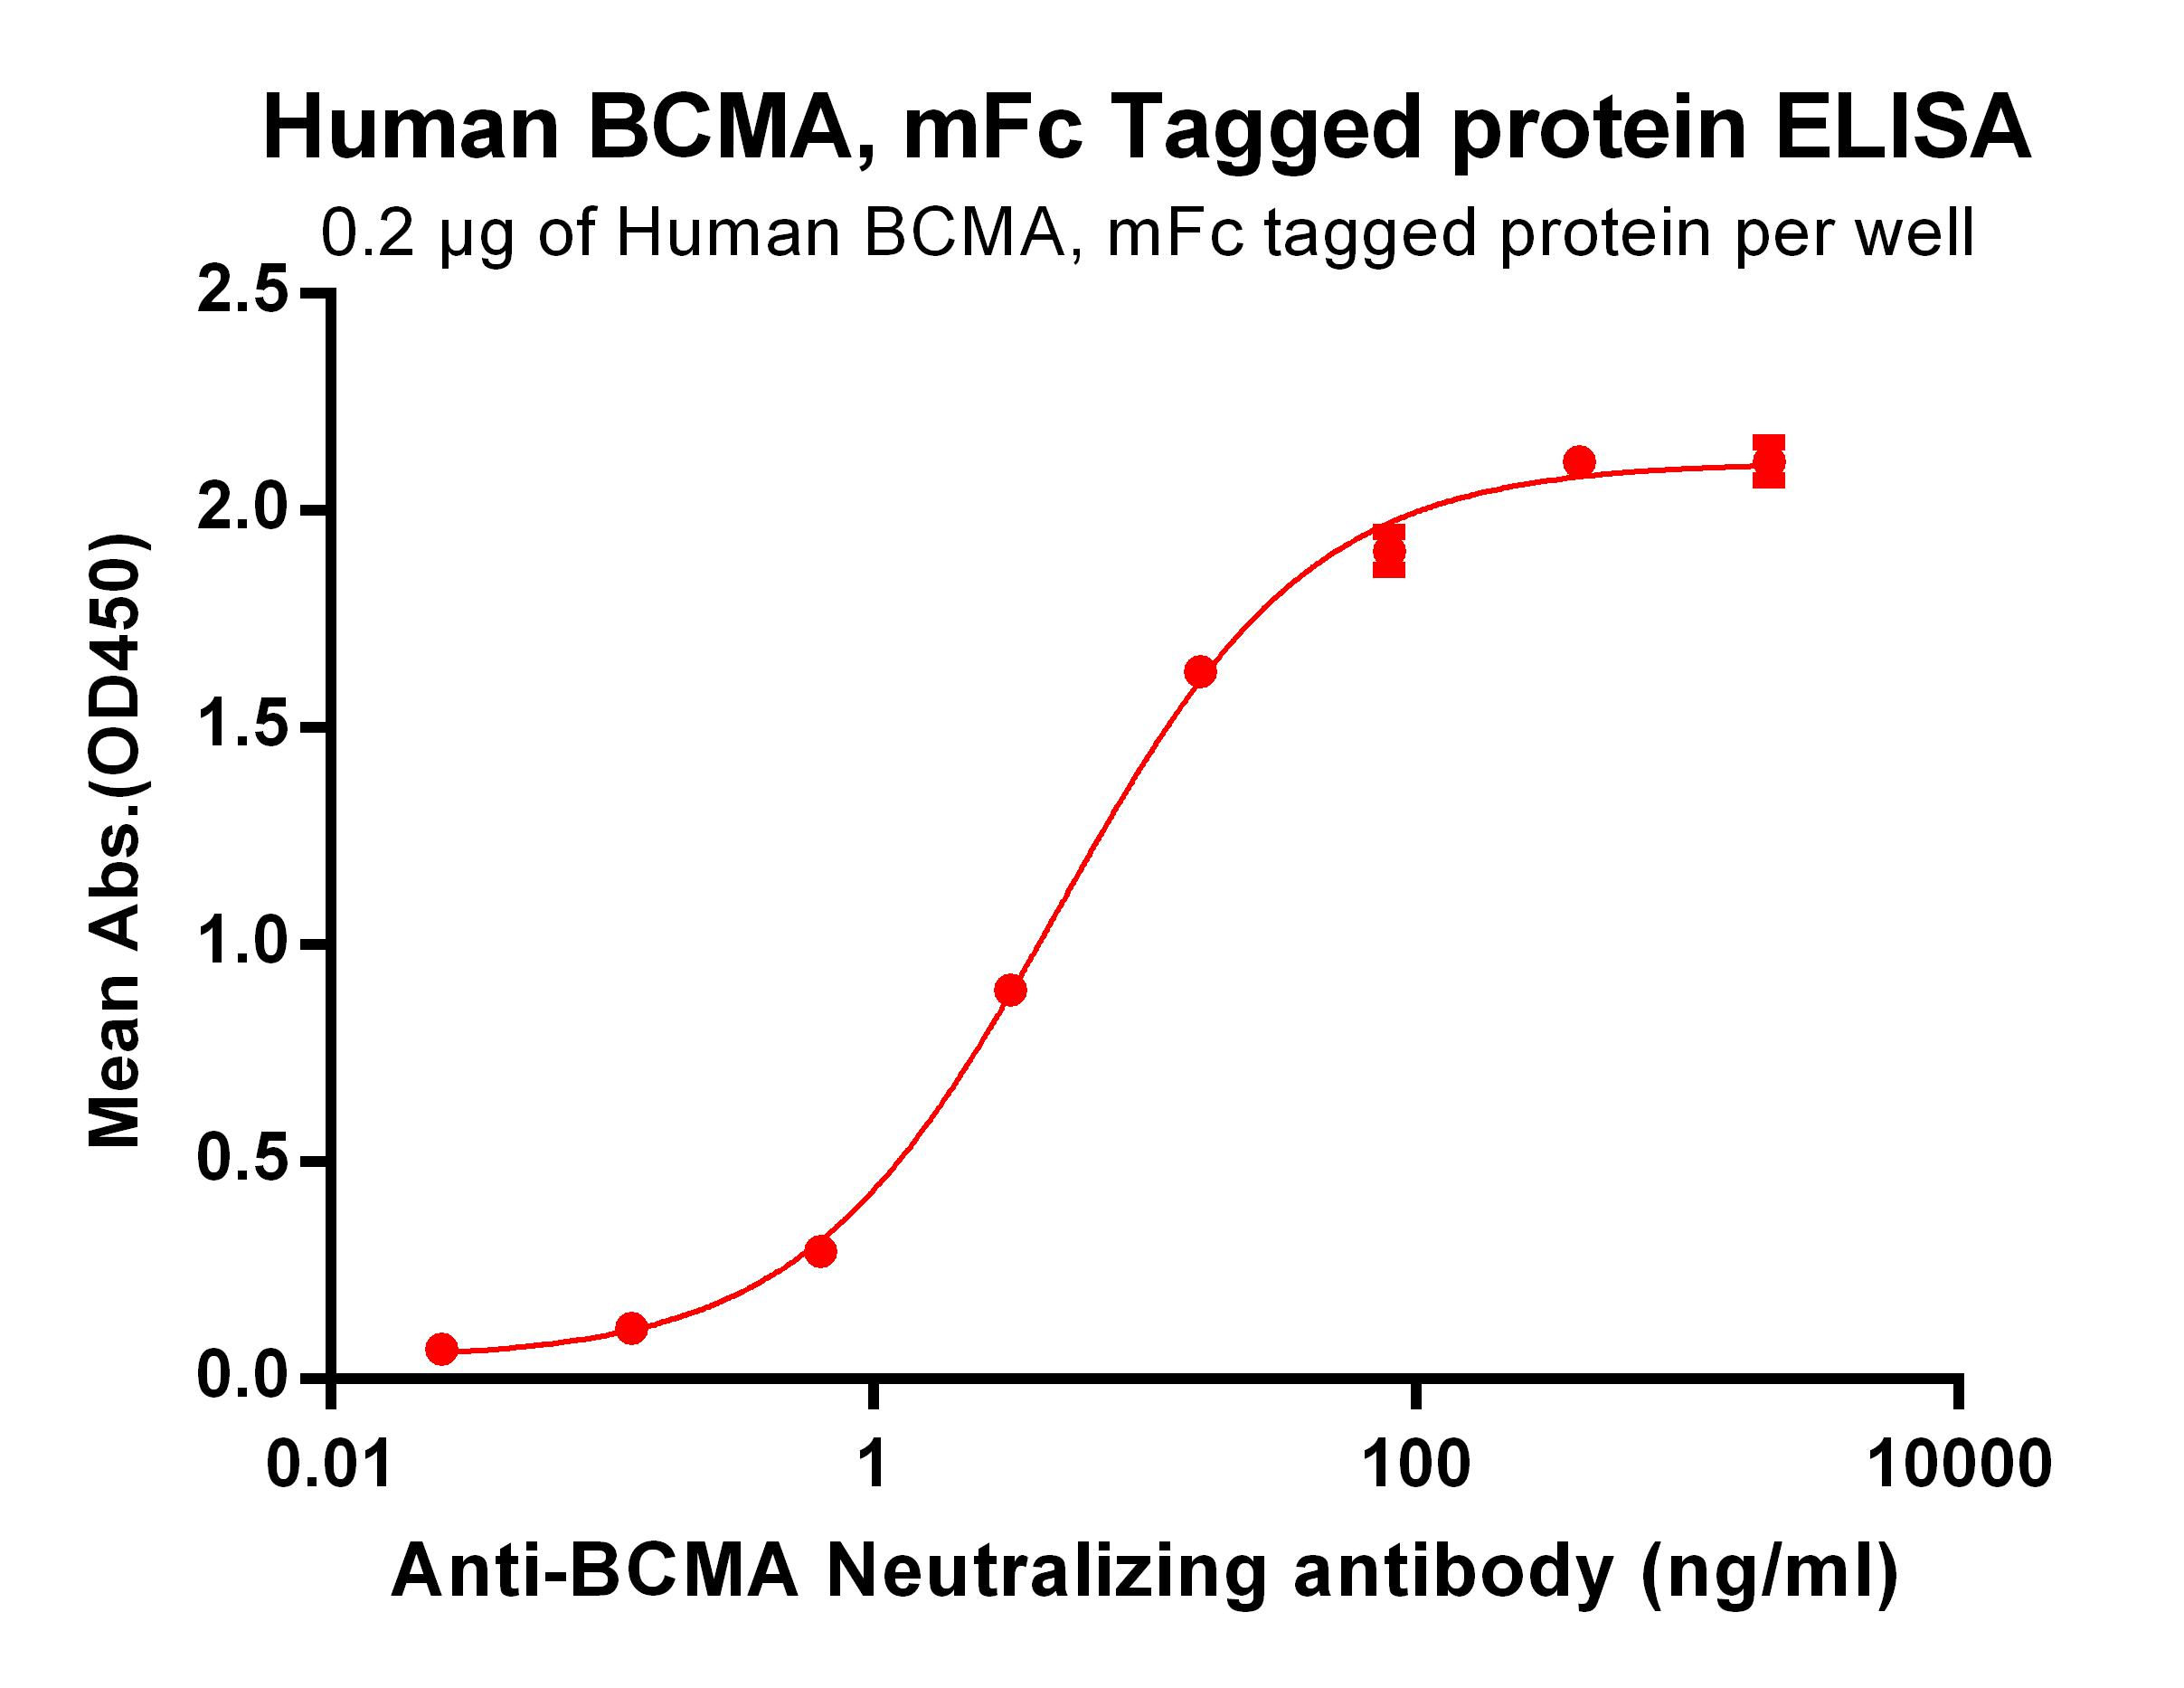 Figure 3. ELISA plate pre-coated by 2 µg/ml (100 µl/well) Human BCMA, mFc tagged protein  can bind Anti-BCMA Neutralizing antibody  in a linear range of 0.64-80.0 ng/ml.